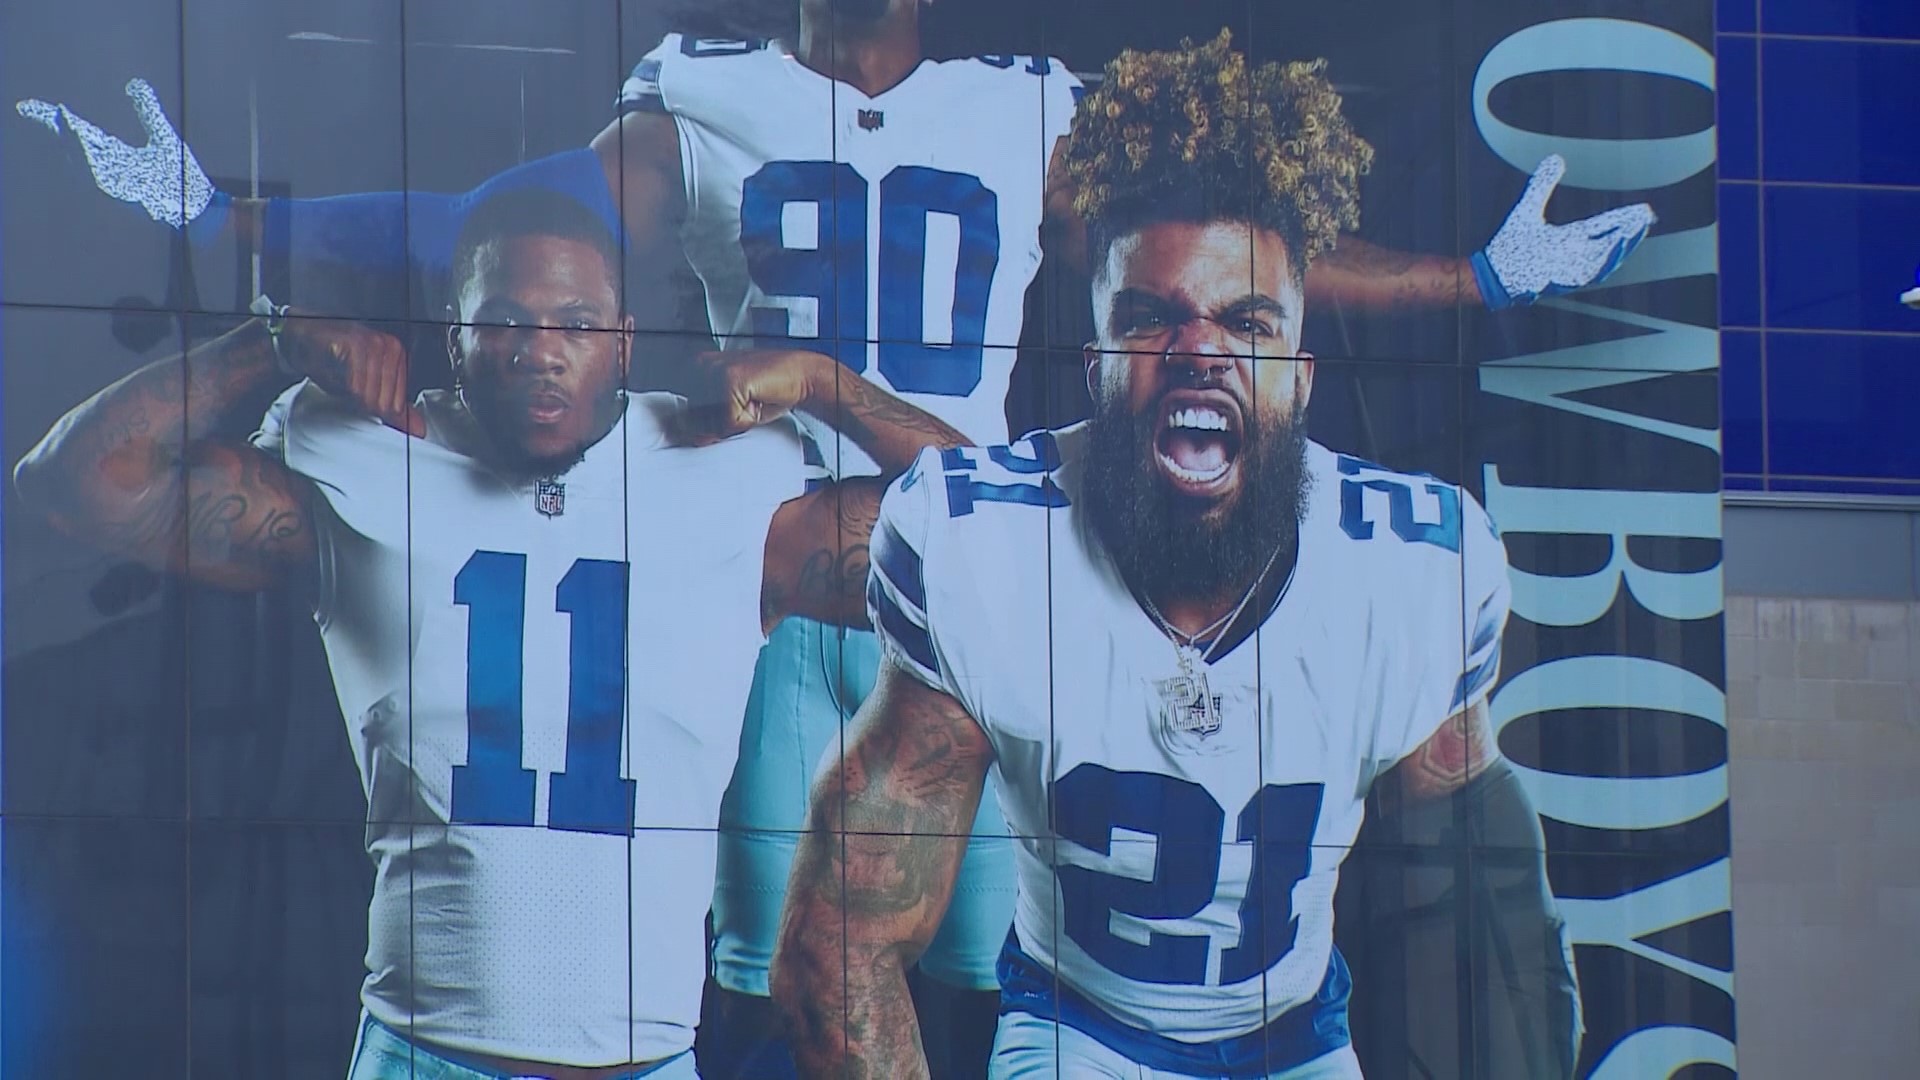 Fans gave their opinion on the Dallas Cowboys parting ways with fan favorite Ezekiel Elliott after seven seasons.